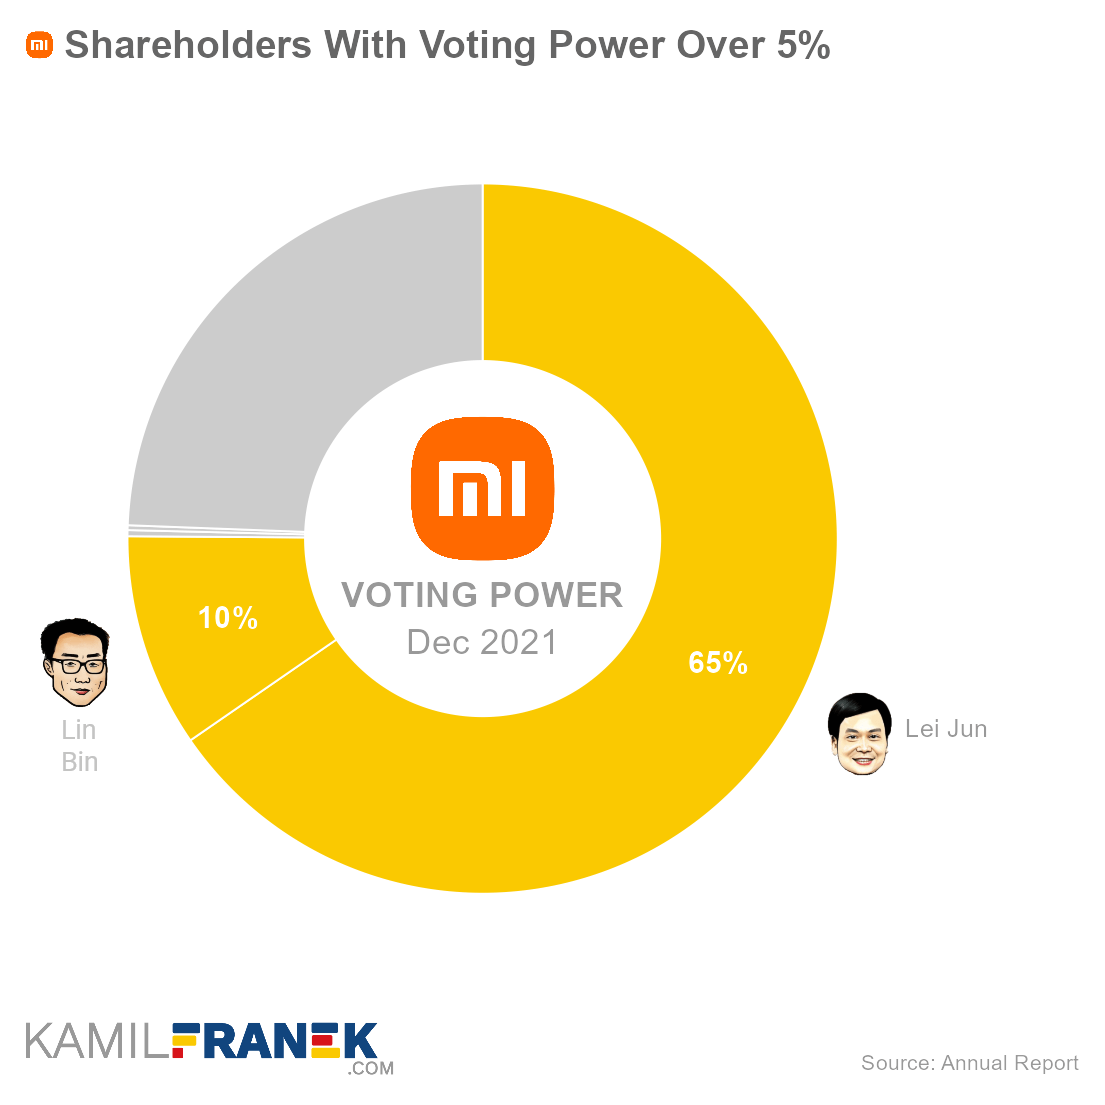 Xiaomi largest shareholders by share ownership and vote control (donut chart)